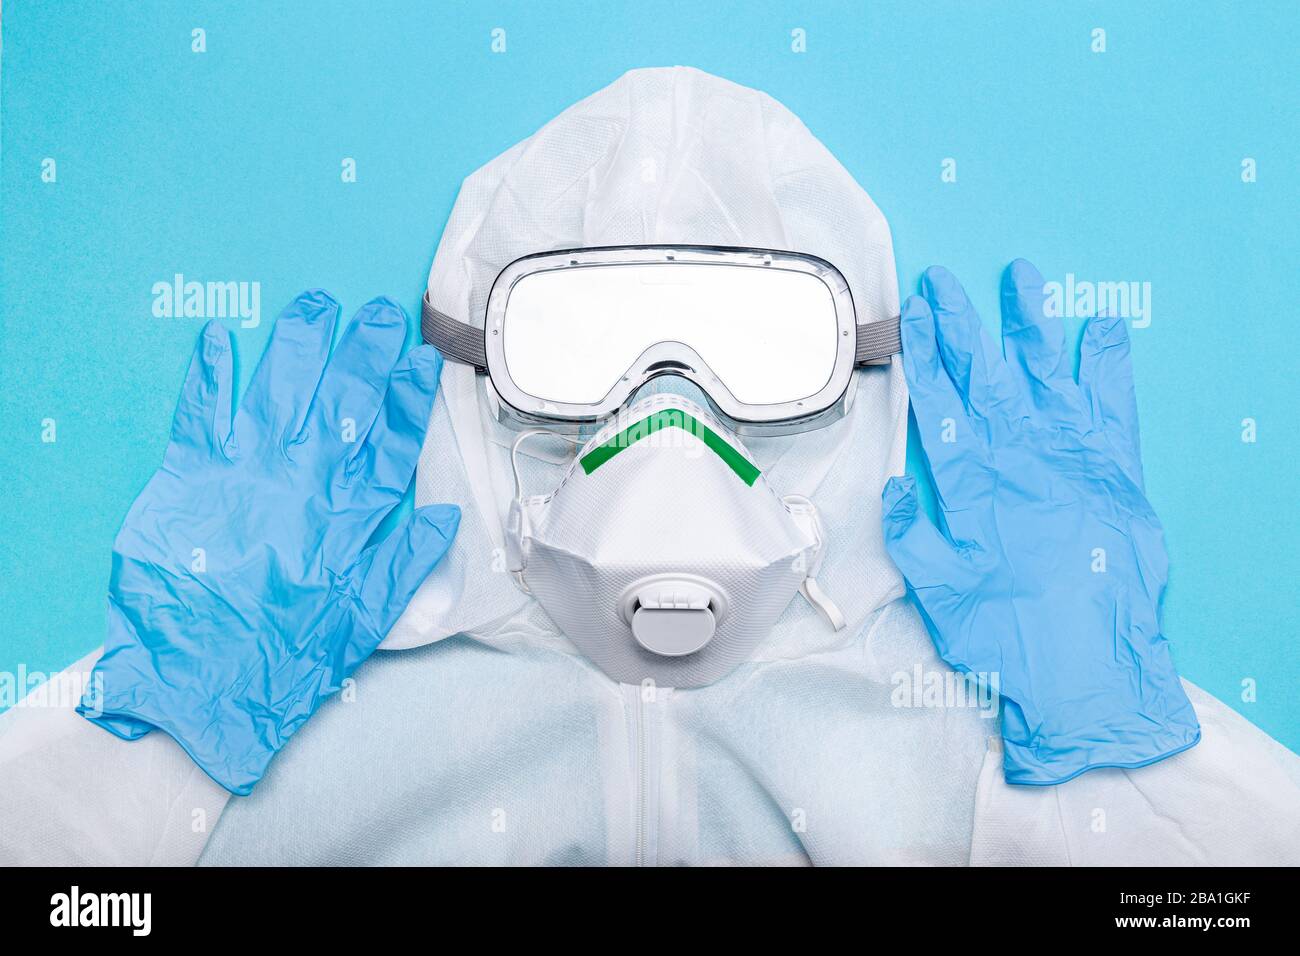 Protective suit to fight to Coronavirus COVID-19 virus outbreak. Safety wear isolated on blue background Stock Photo